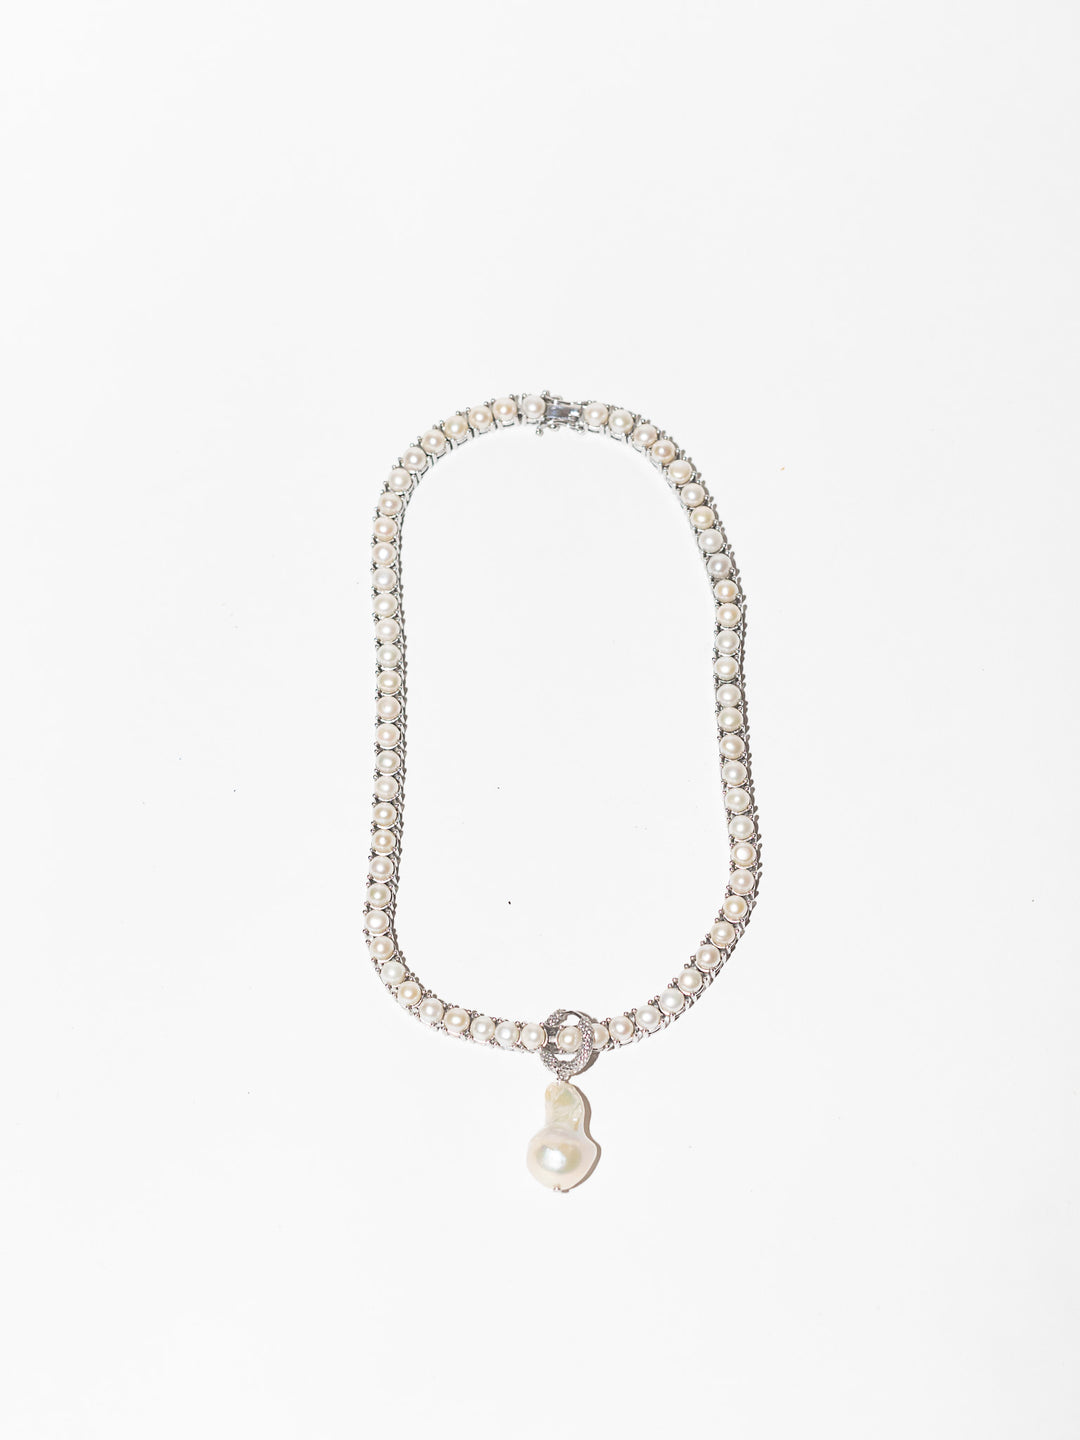 PEARL AND SILVER TENNIS NECKLACE